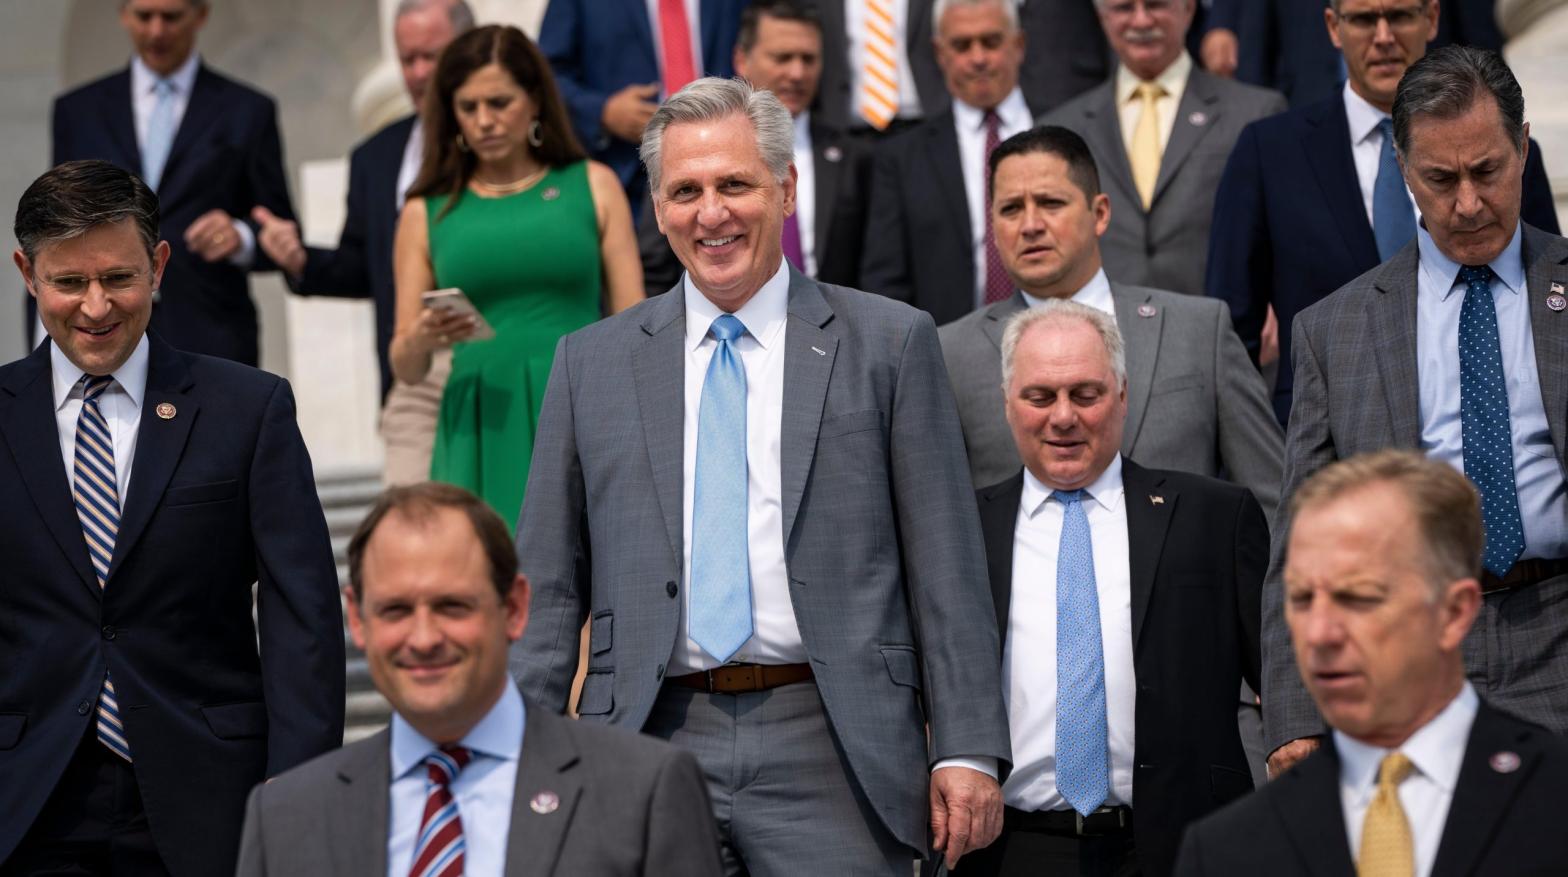 House Republicans outside the U.S. Capitol celebrate death and disease on July 29, 2021 in Washington, D.C. (Photo: Drew Angerer, Getty Images)